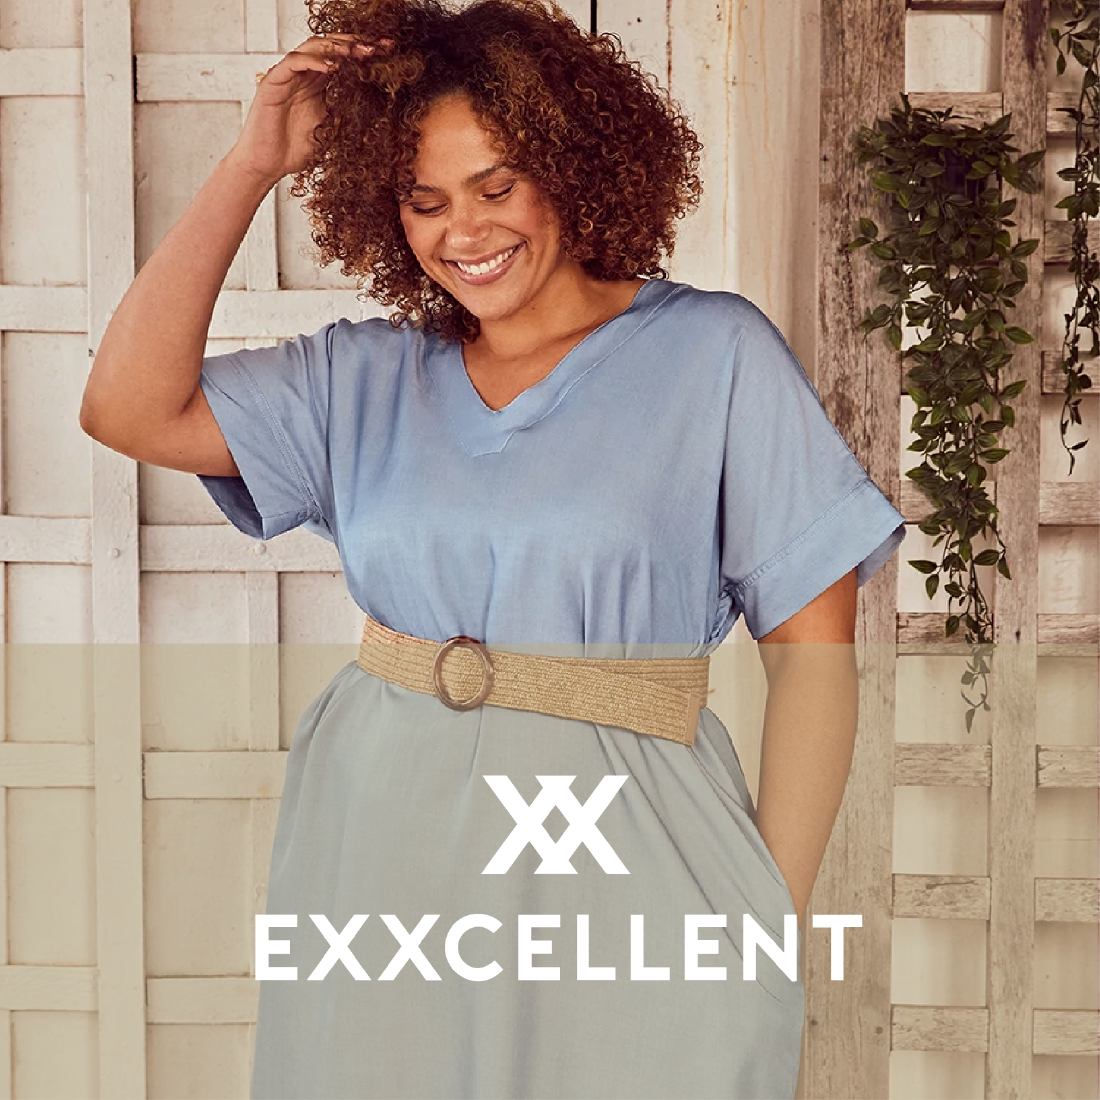 beddengoed Schema Correlaat EXXCELLENT | Na-Na Fashion & More